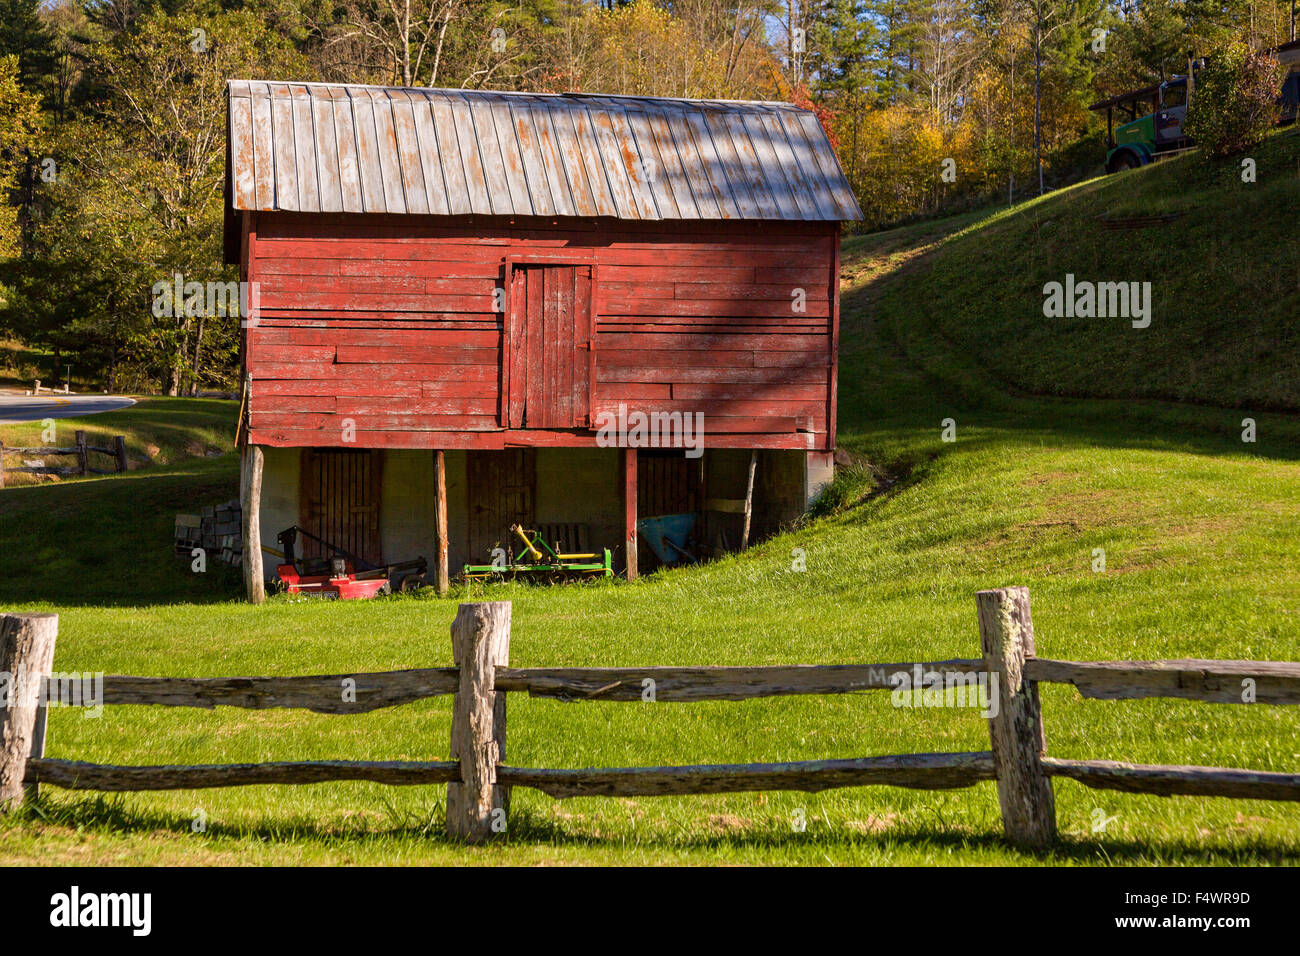 An old wooden barn and split rail fence along the Quilt Trails in Prices Creek, North Carolina. The quilt trails honor handmade quilt designs of the rural Appalachian region. Stock Photo